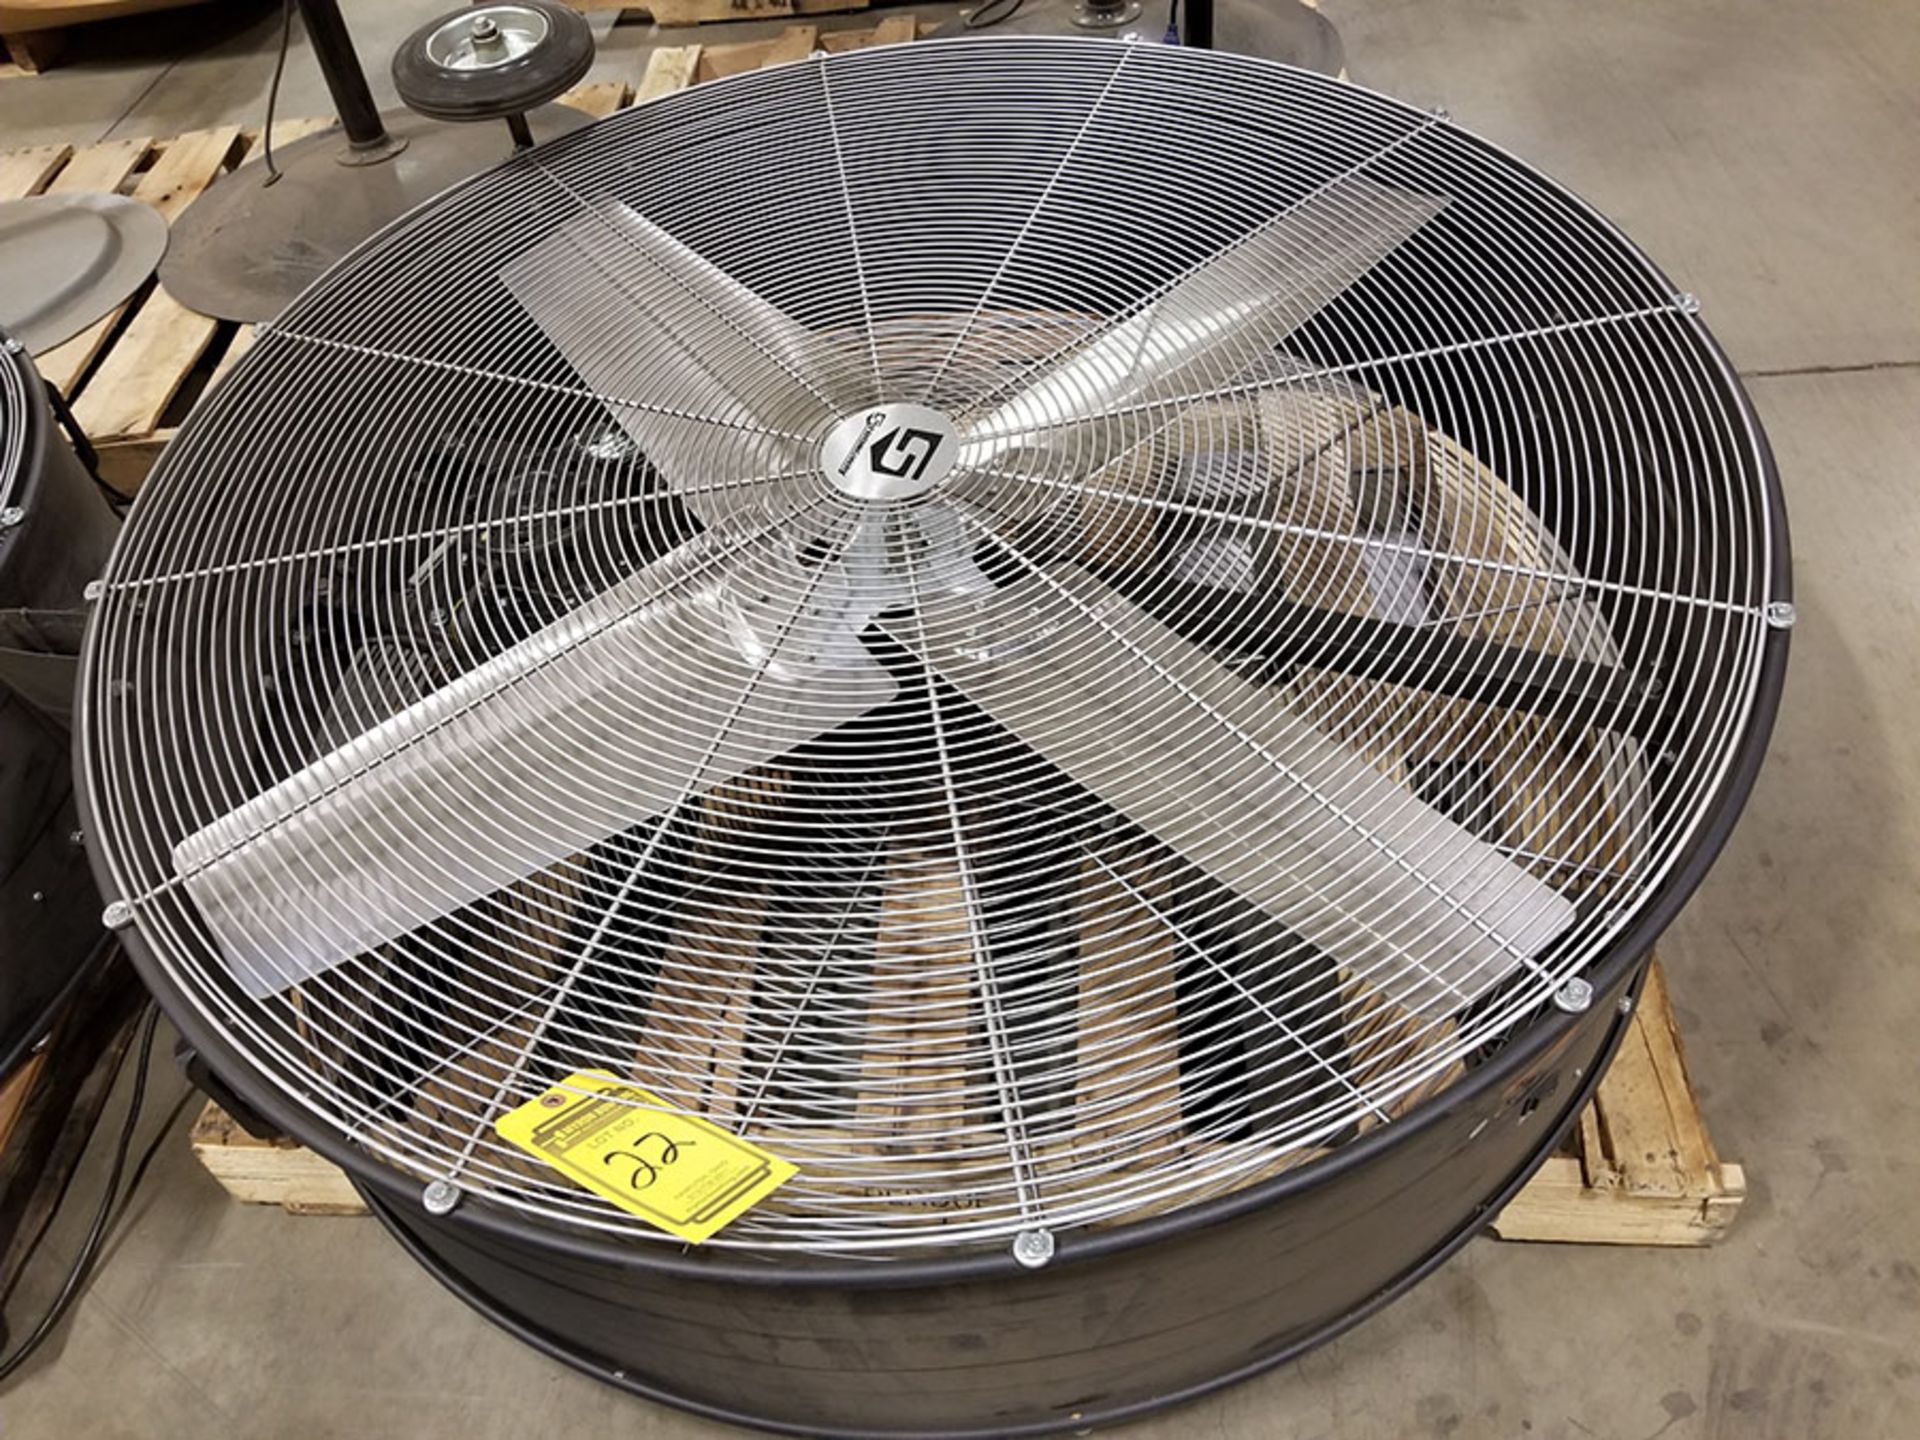 STRONGWAY 48’’ BELT DRIVE DRUM FANS, MODEL 49935, 120V, 60HZ, 9A, LO/HIGH SWITCH - Image 2 of 5